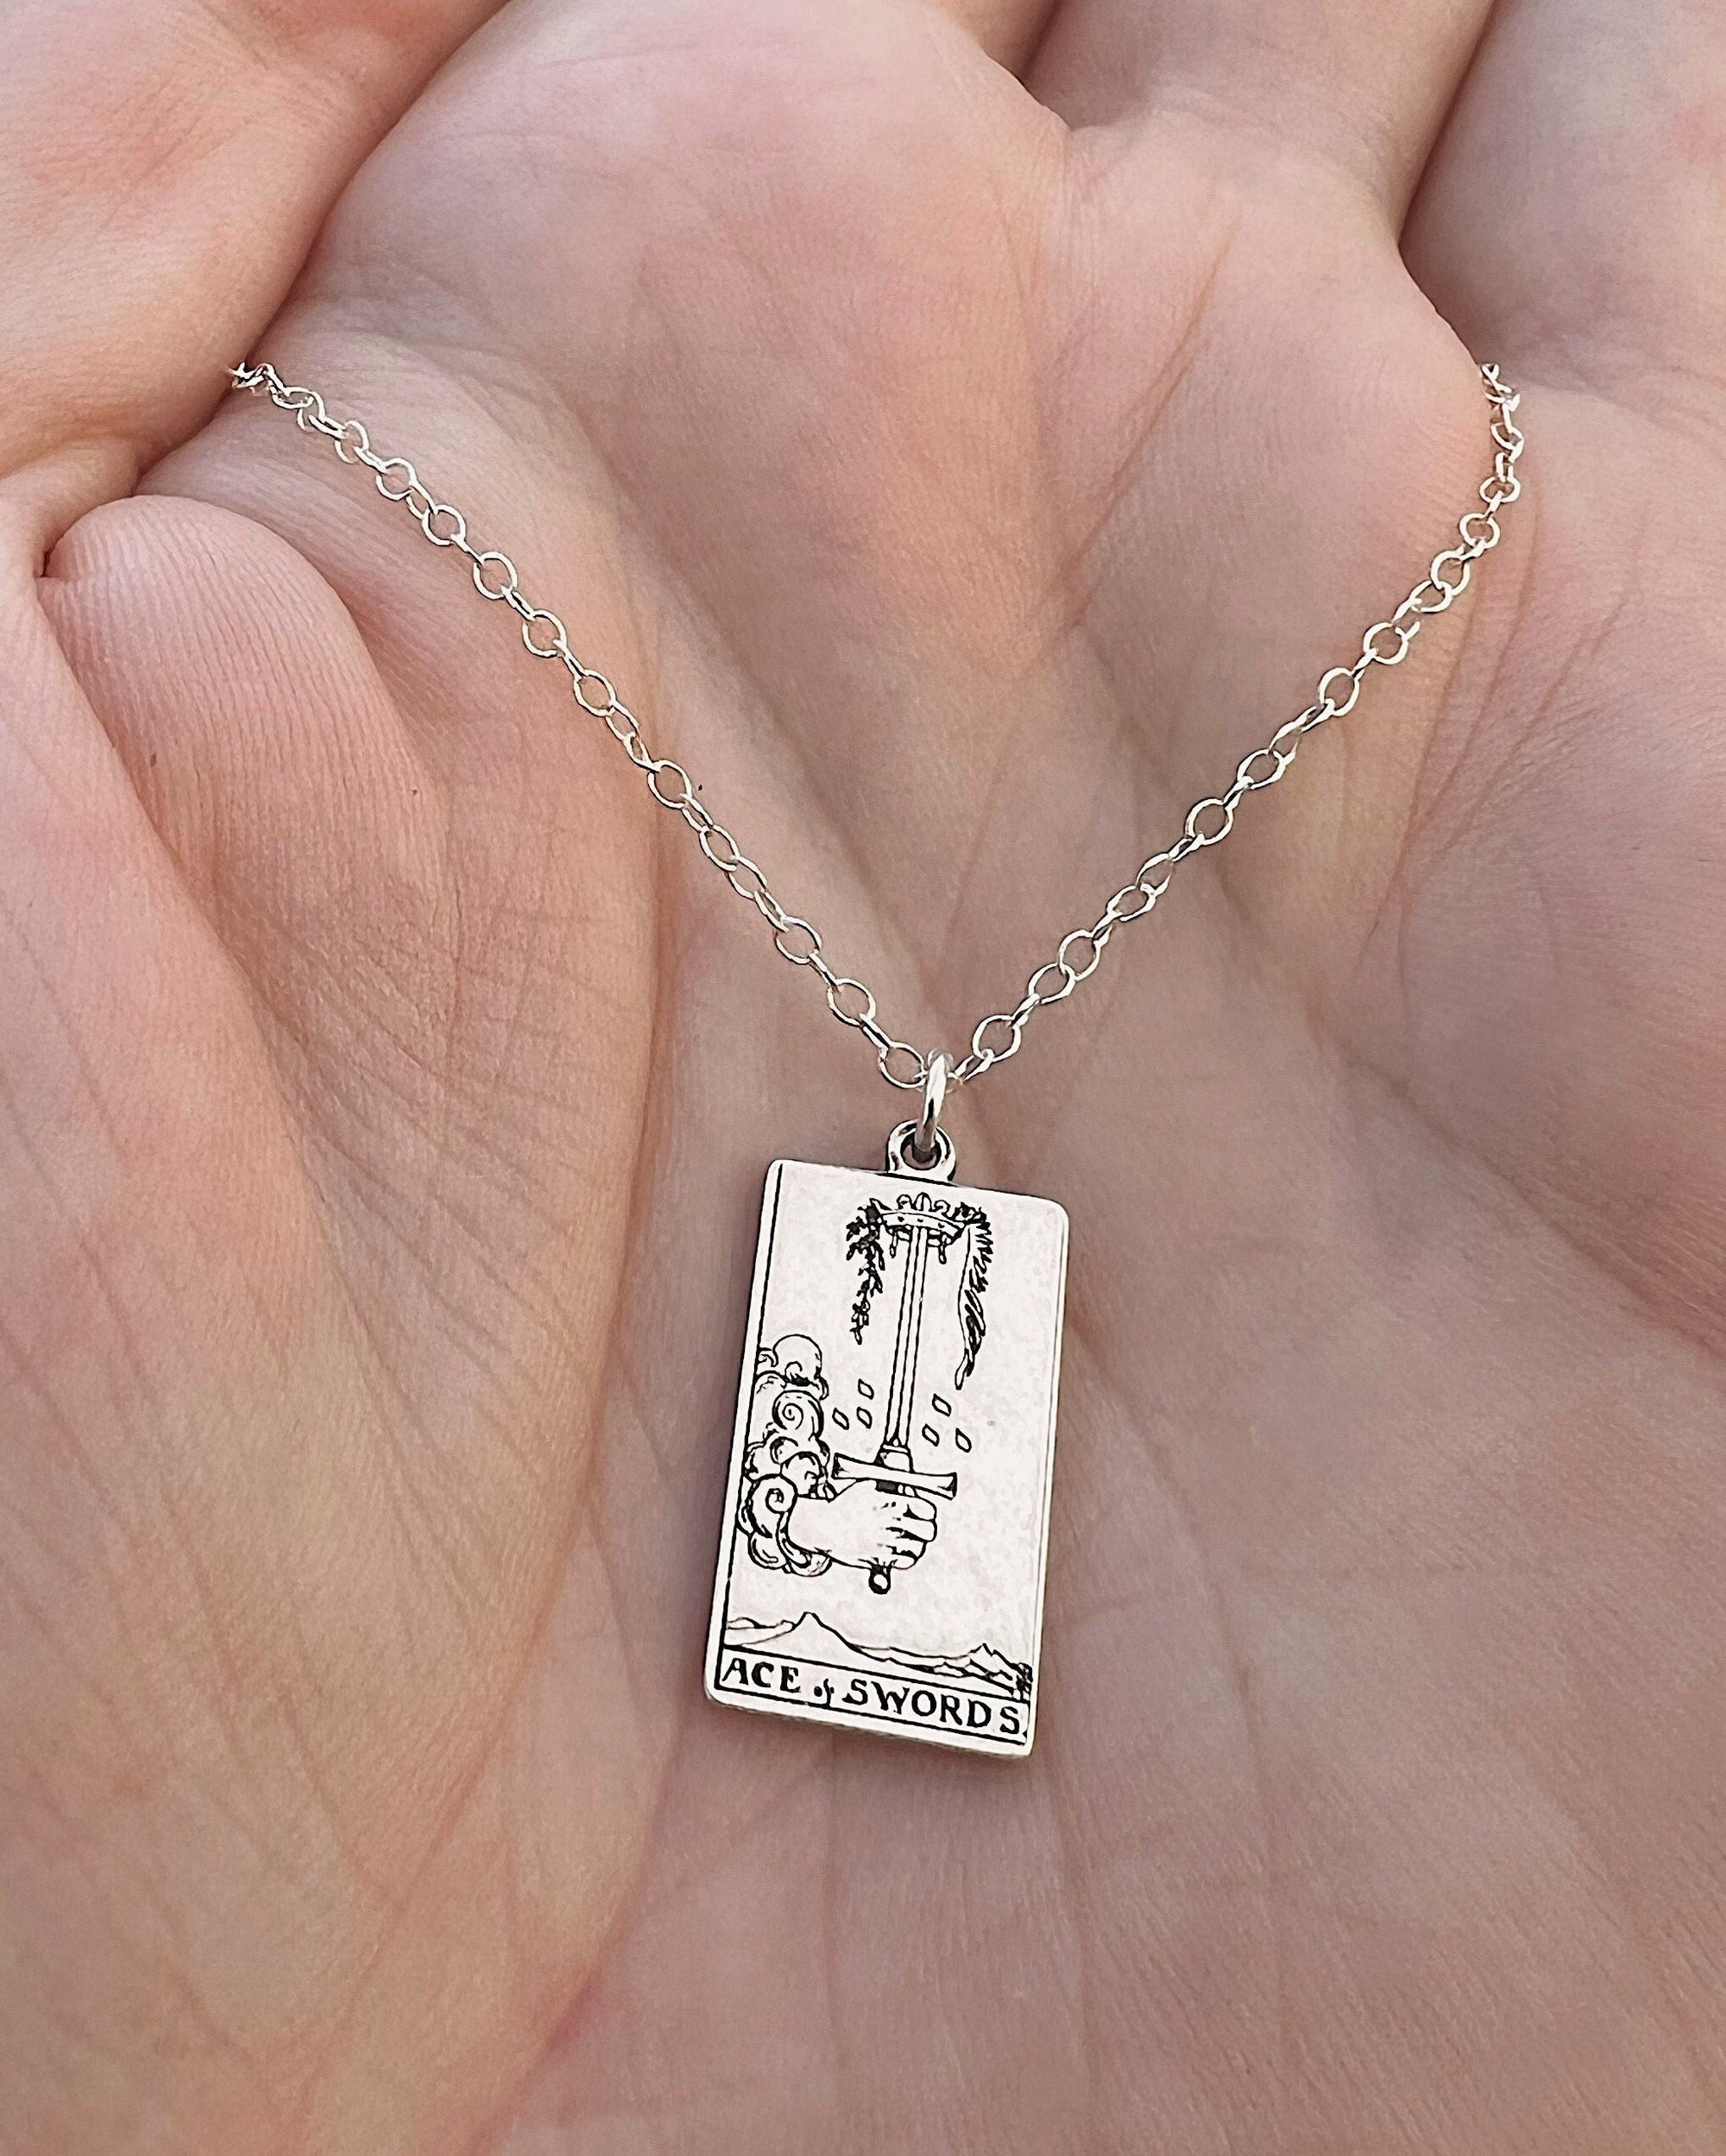 Ace of Swords Tarot Card Necklace - Sterling Silver